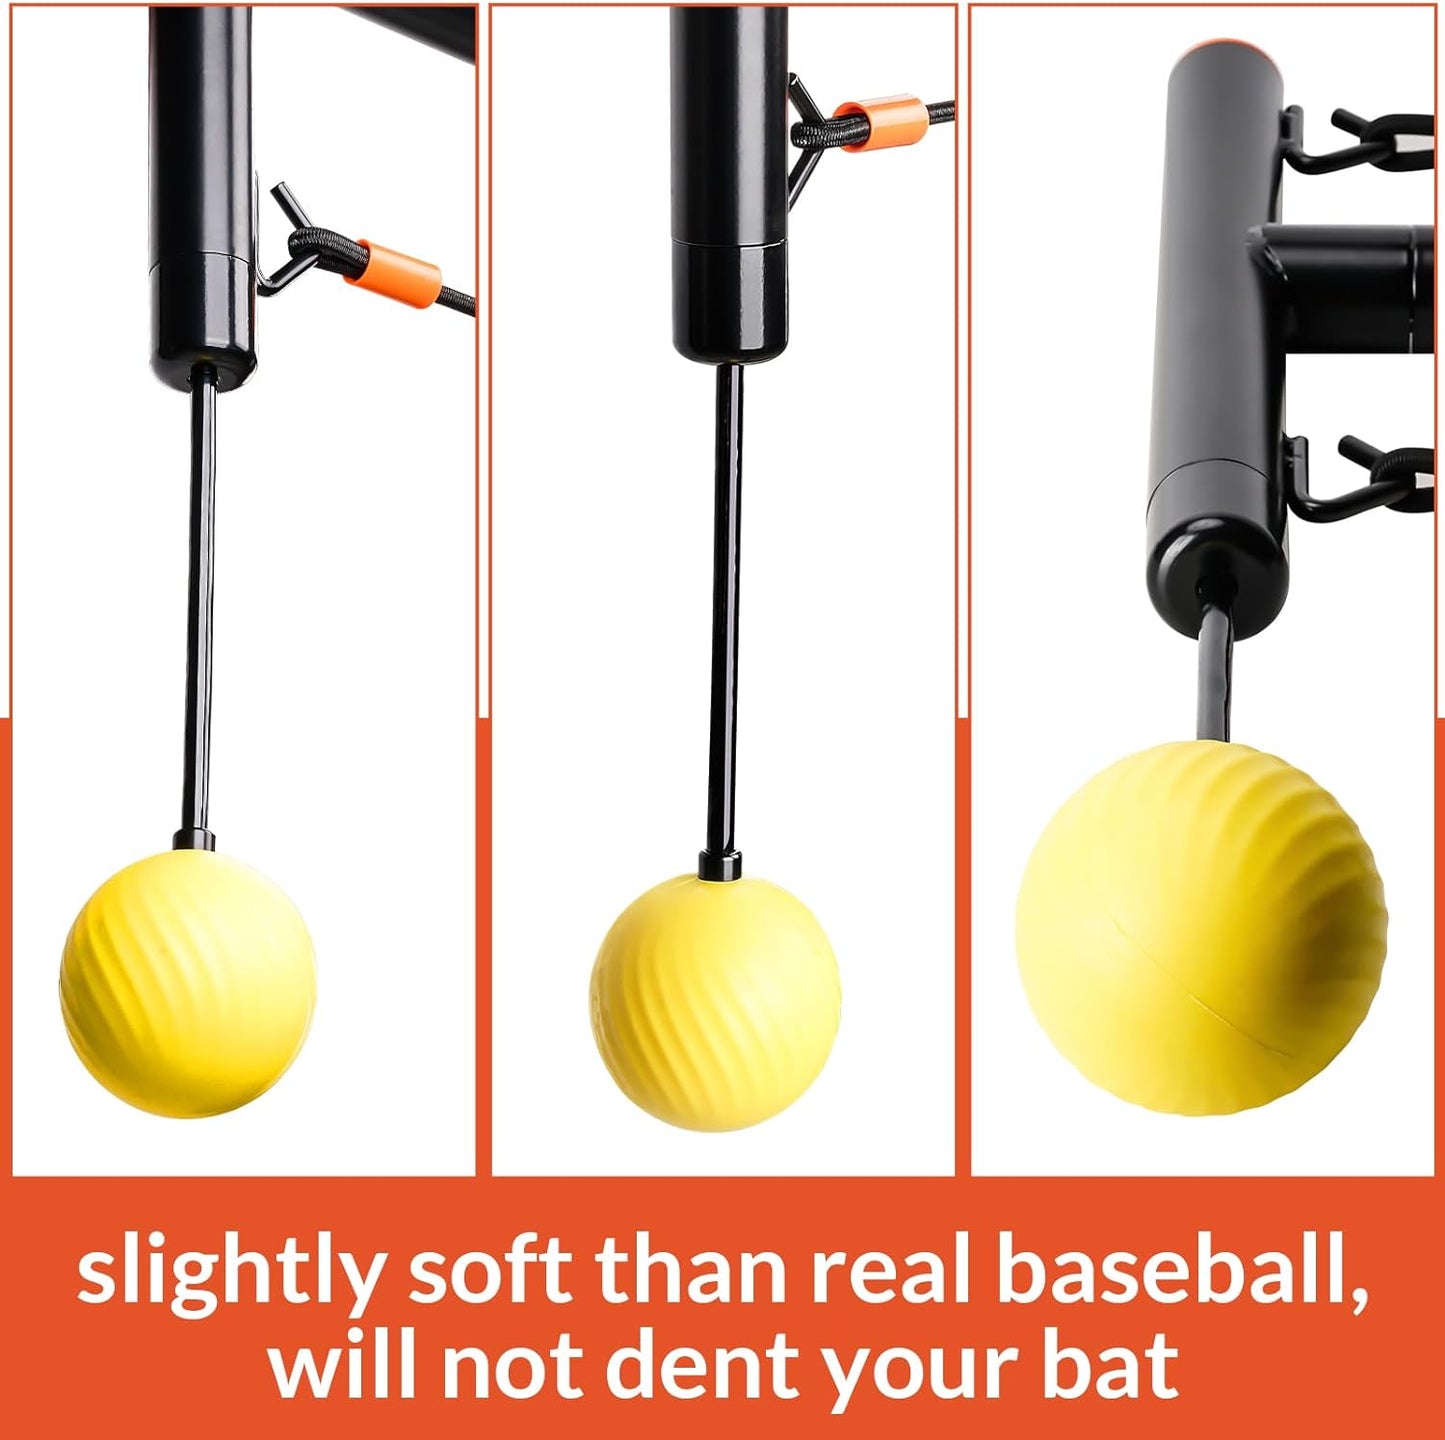 KuBluent Rock II Batting Practice & Hitting Swing Trainer with Auto Reset Function for Baseball and Softball Training, Height Adjustable, Portable with Carrying Bag